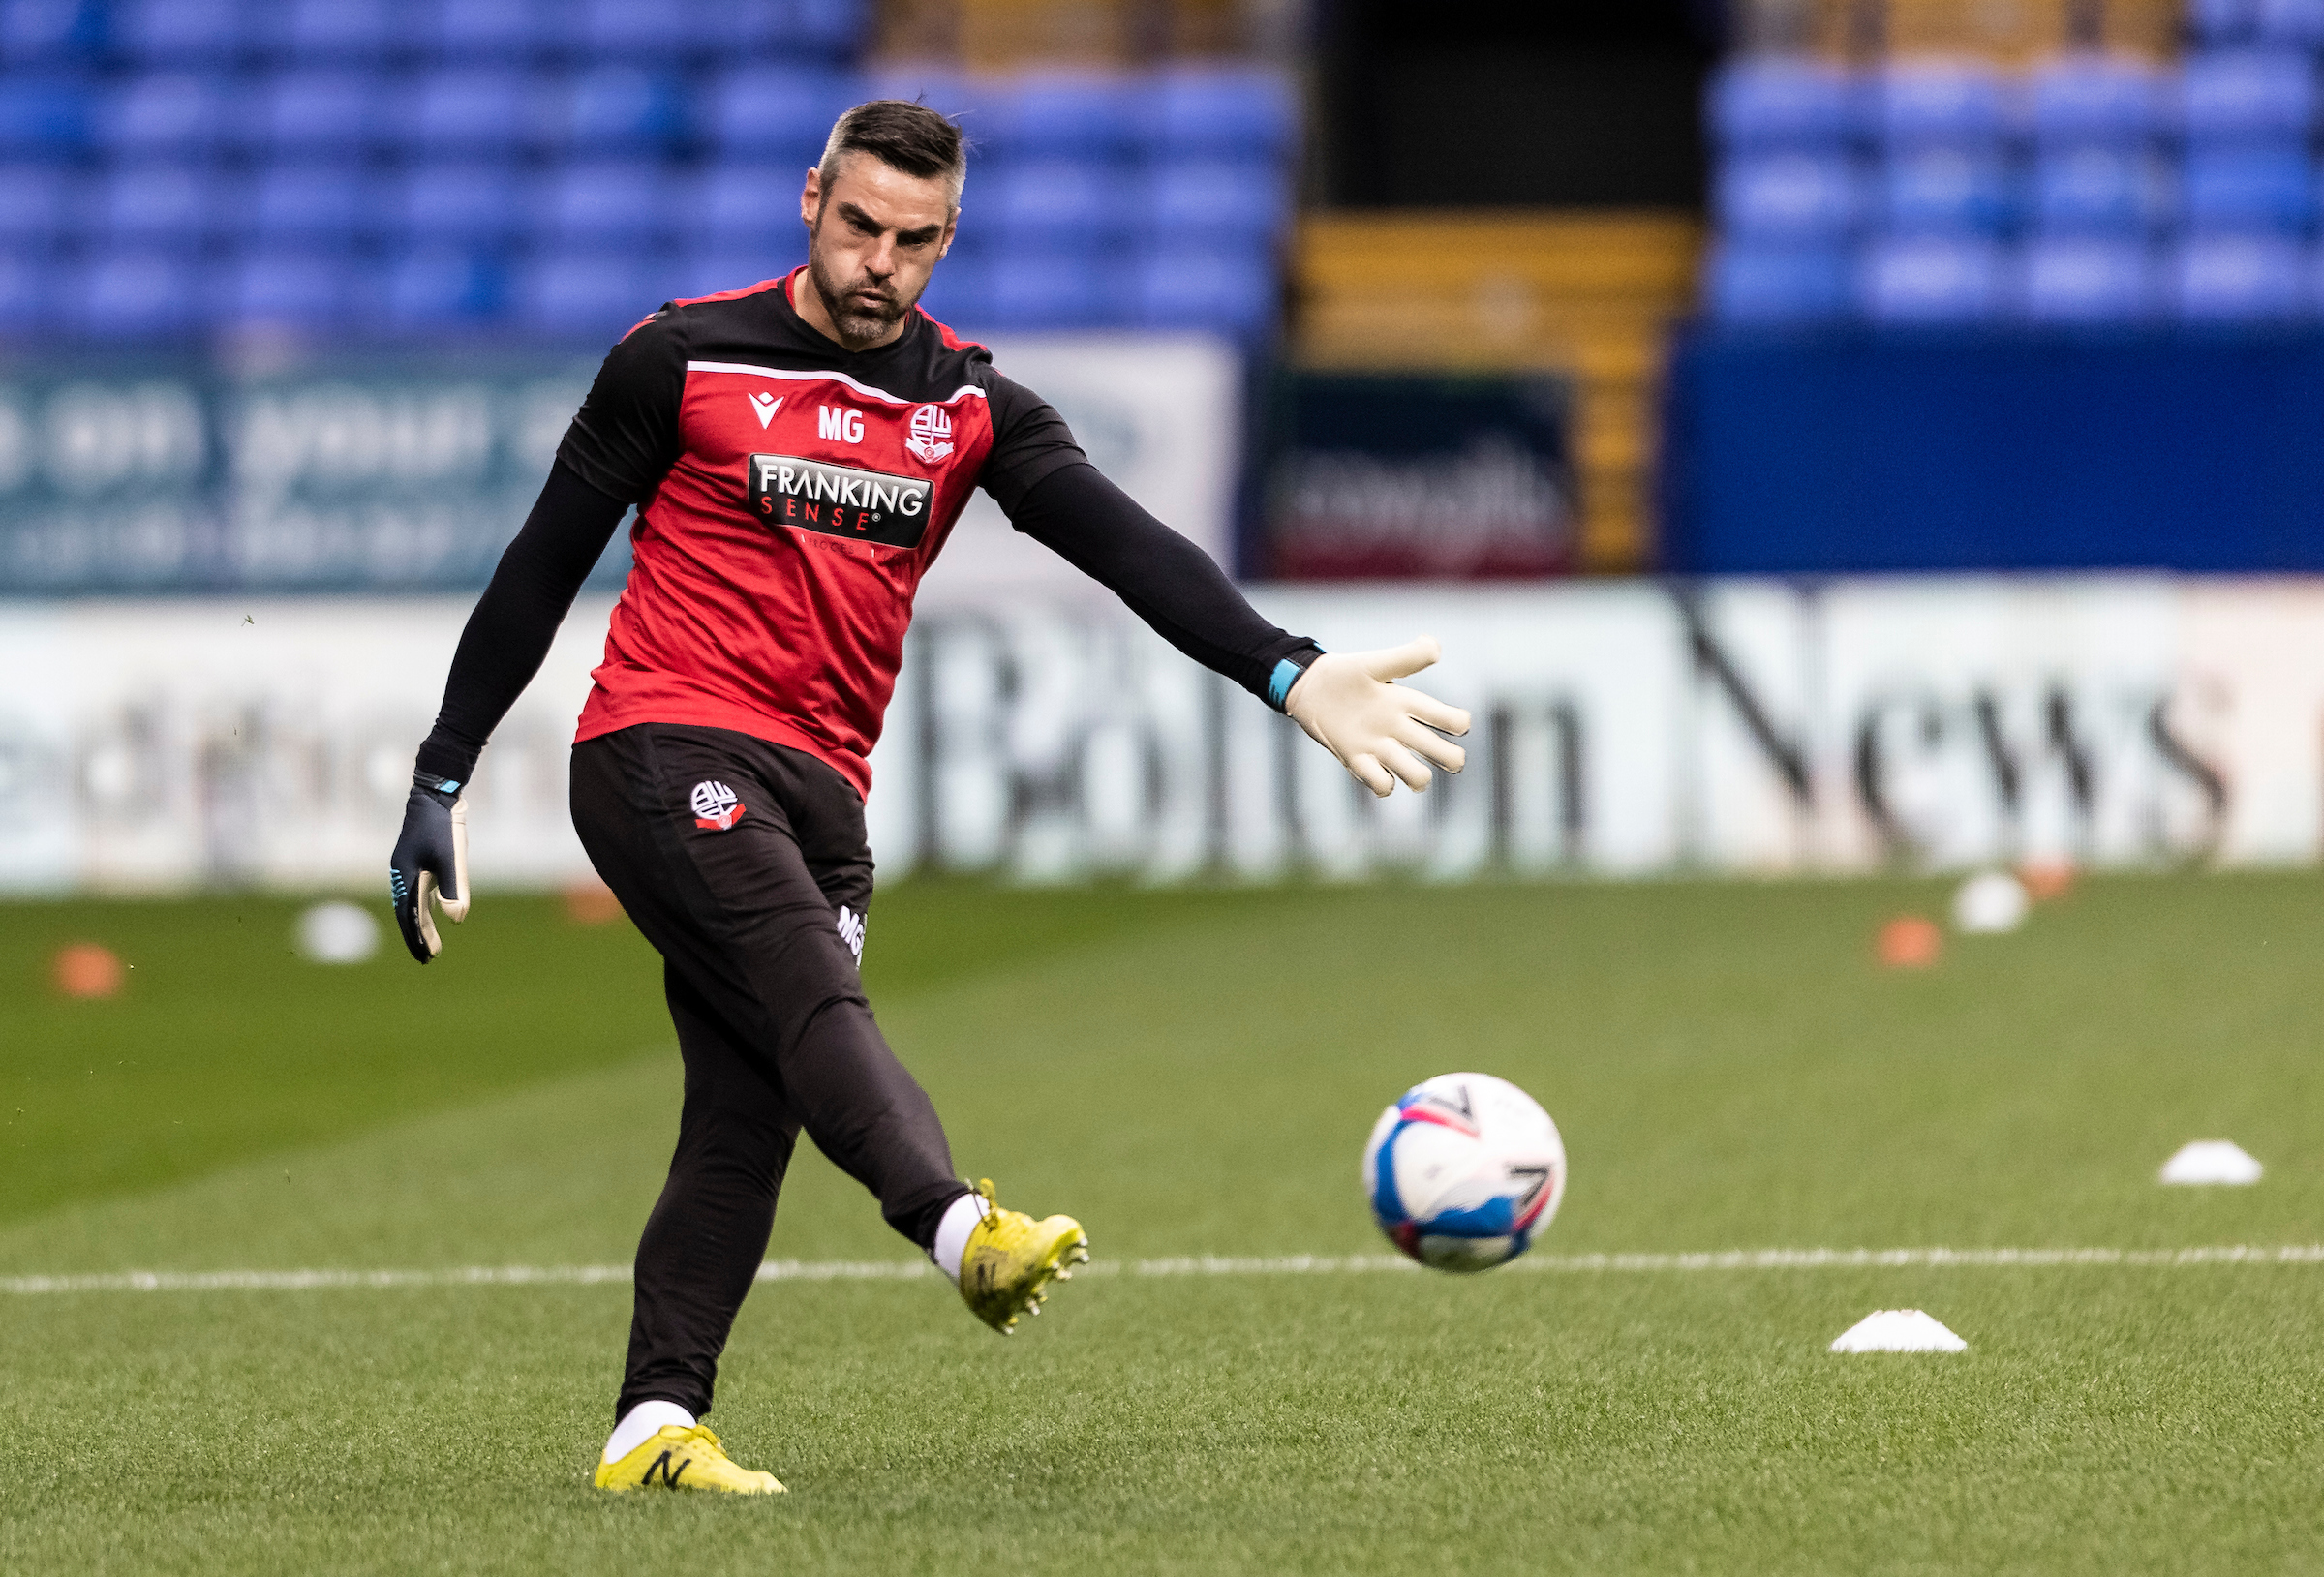 Bolton Wanderers' Matt Gilks on 'throwback' James Trafford and transitioning into coaching